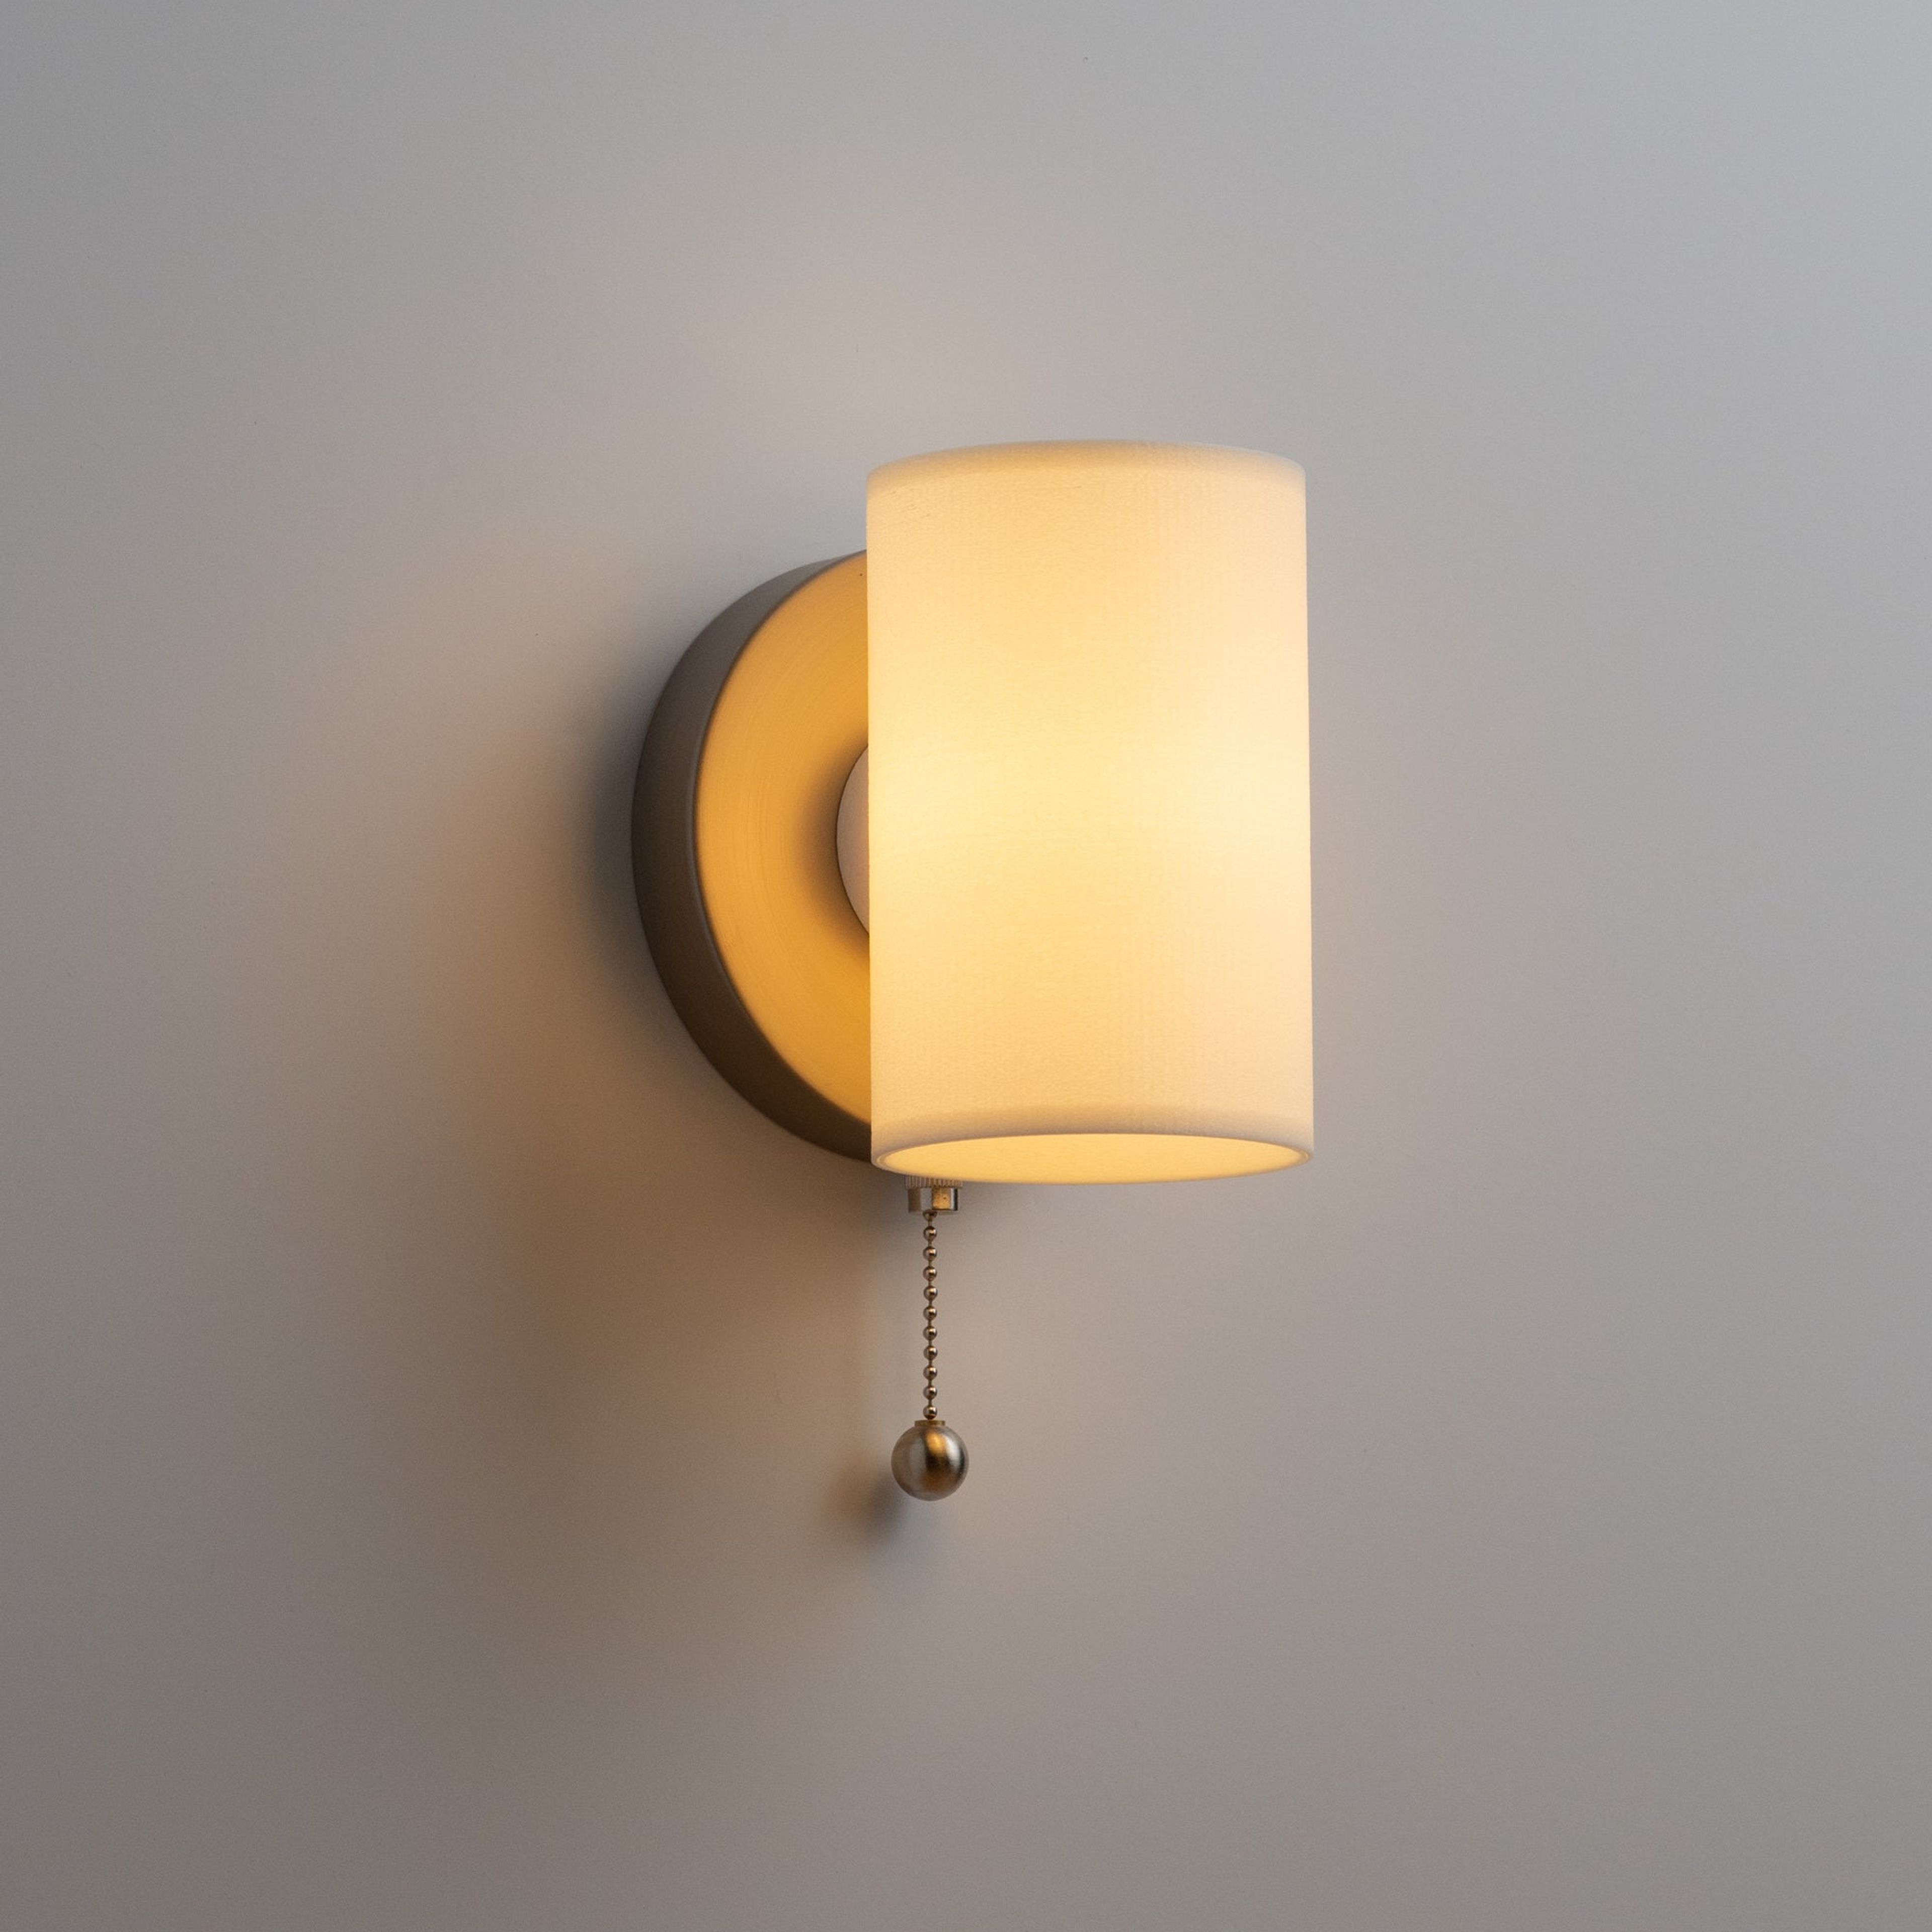 CY Sconce